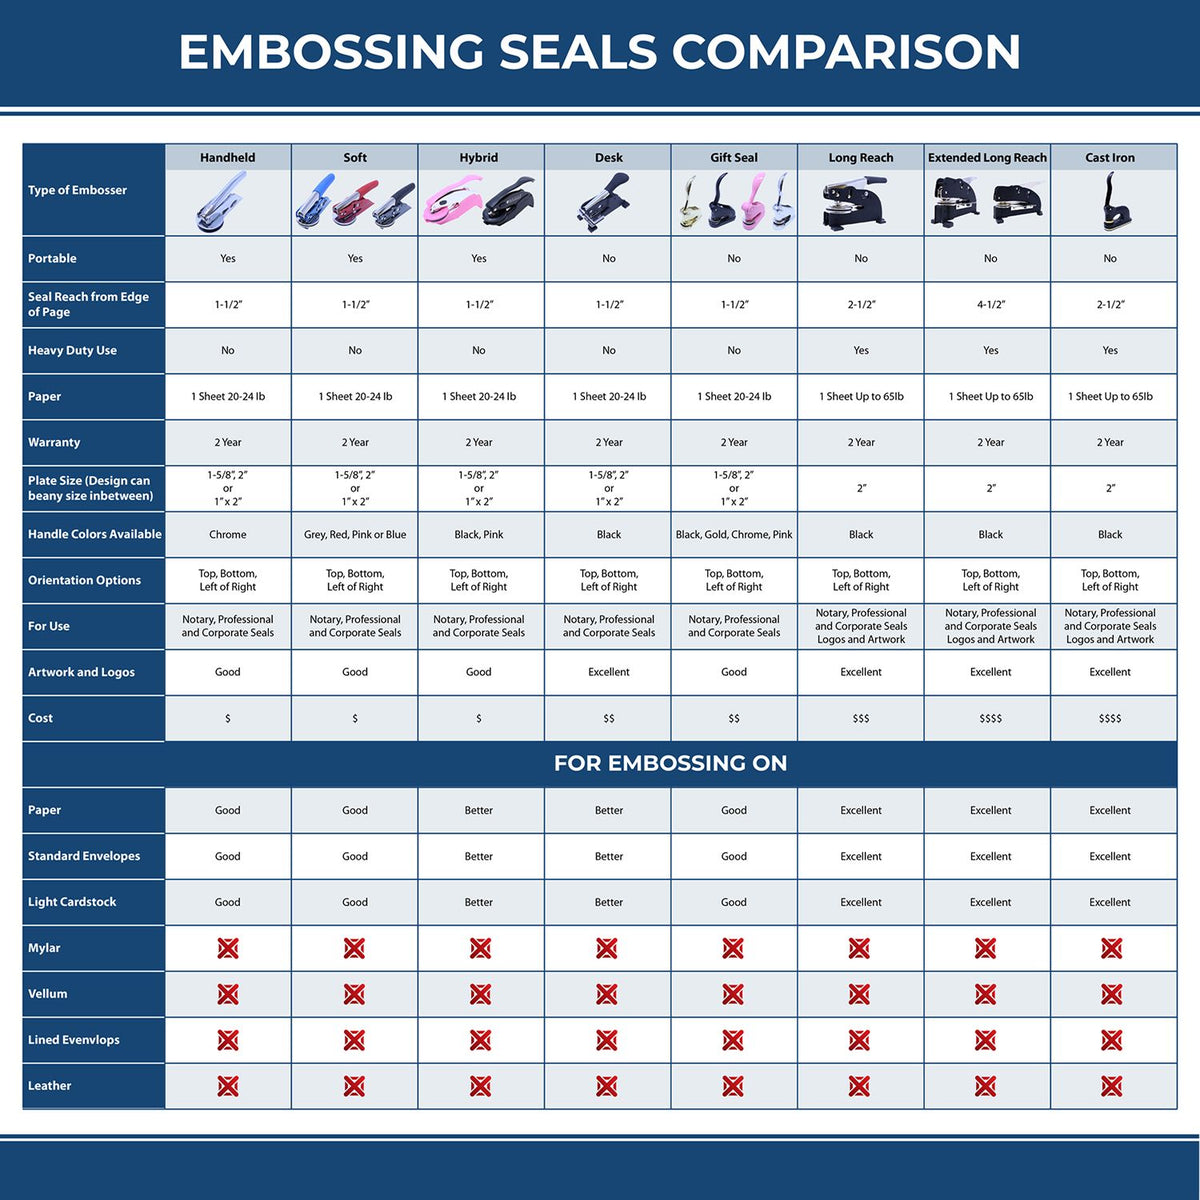 A comparison chart for the different types of mount models available for the Soft New Jersey Professional Engineer Seal.